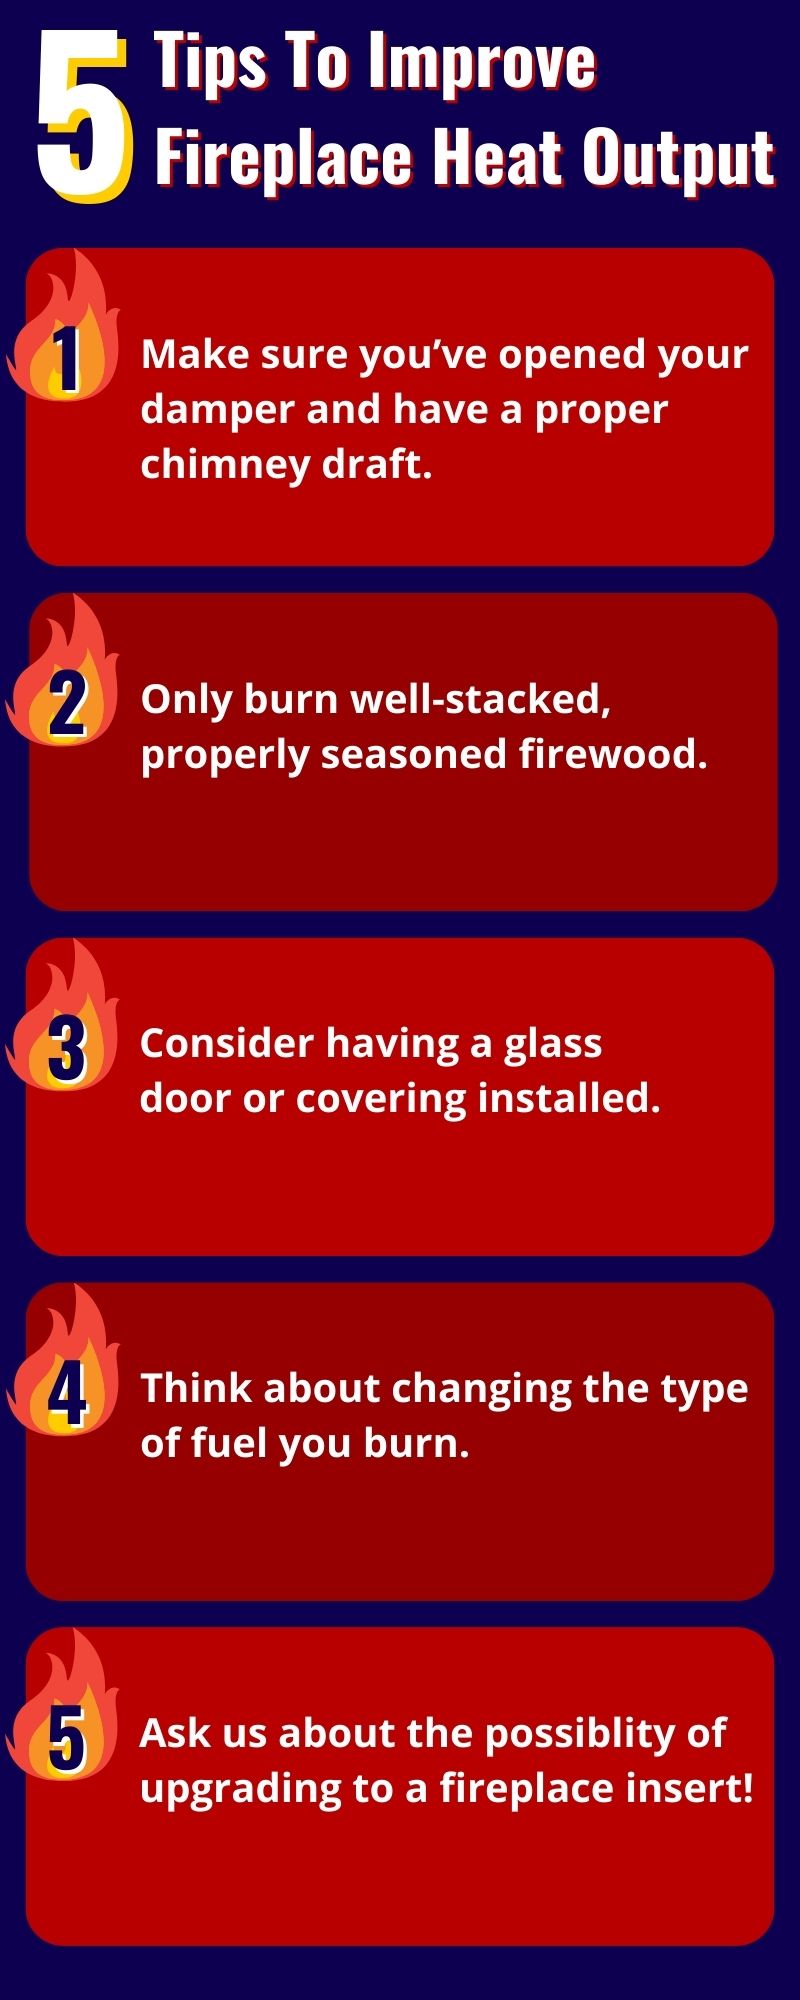 original infographic stating 5 tips to improve fireplace heat output